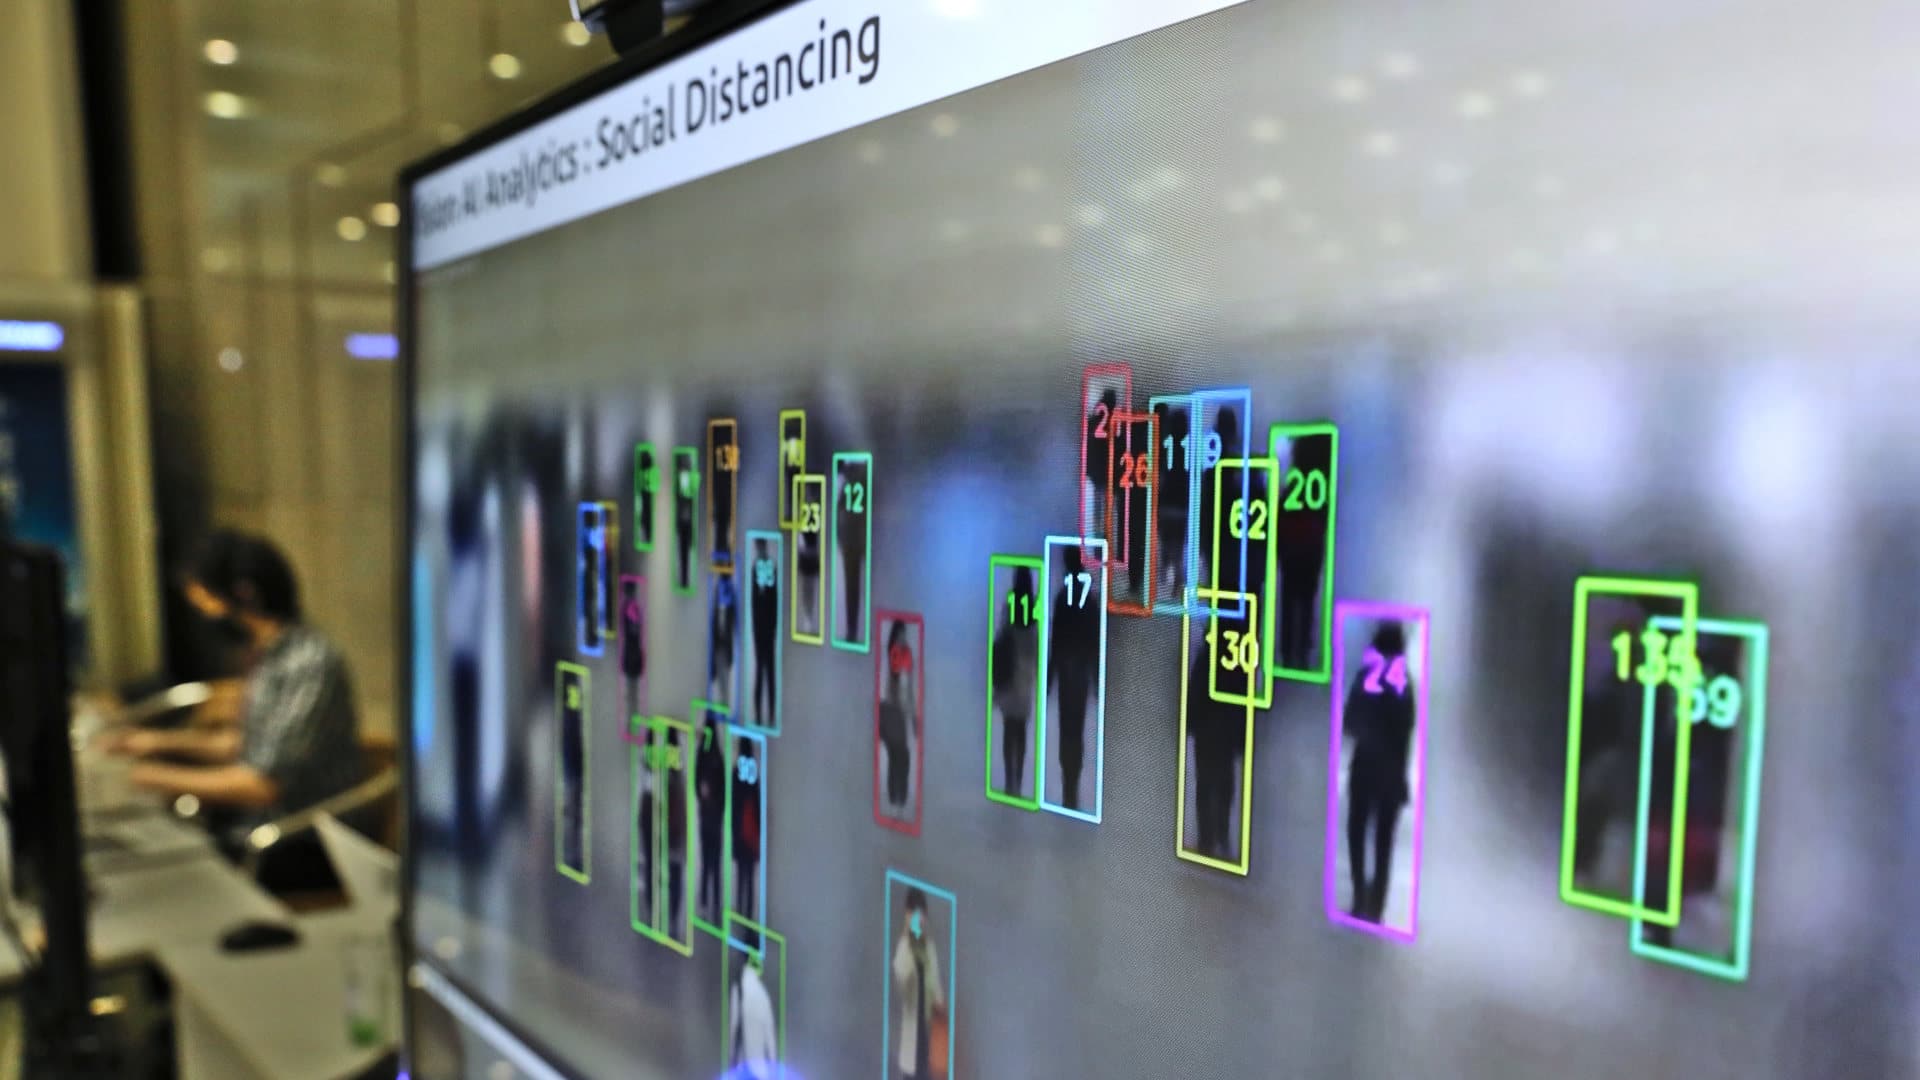 Object detection and tracking technology for people not wearing masks, developed by SK Telecom, is displayed on a screen at the company headquarters on May 26, 2020 in Seoul, South Korea.